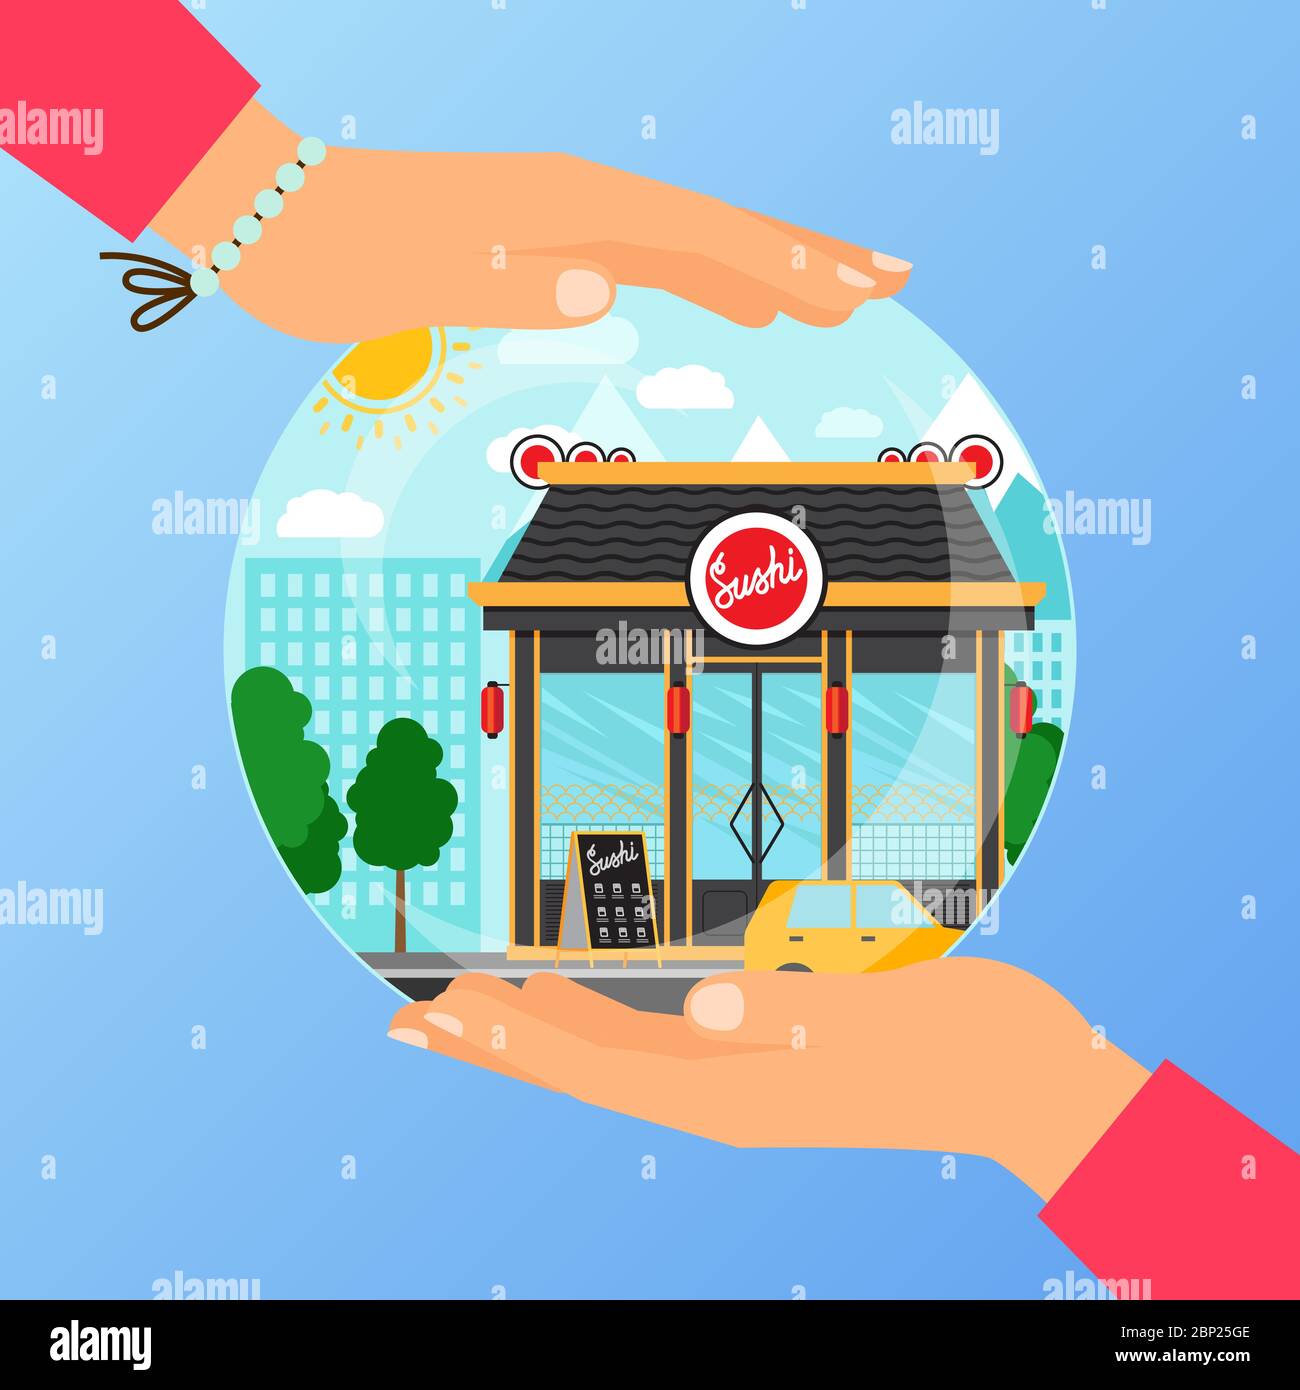 Business concept for opening the institution of sushi restaurant. A woman is holding a glass ball with her hands, vector illustration Stock Vector